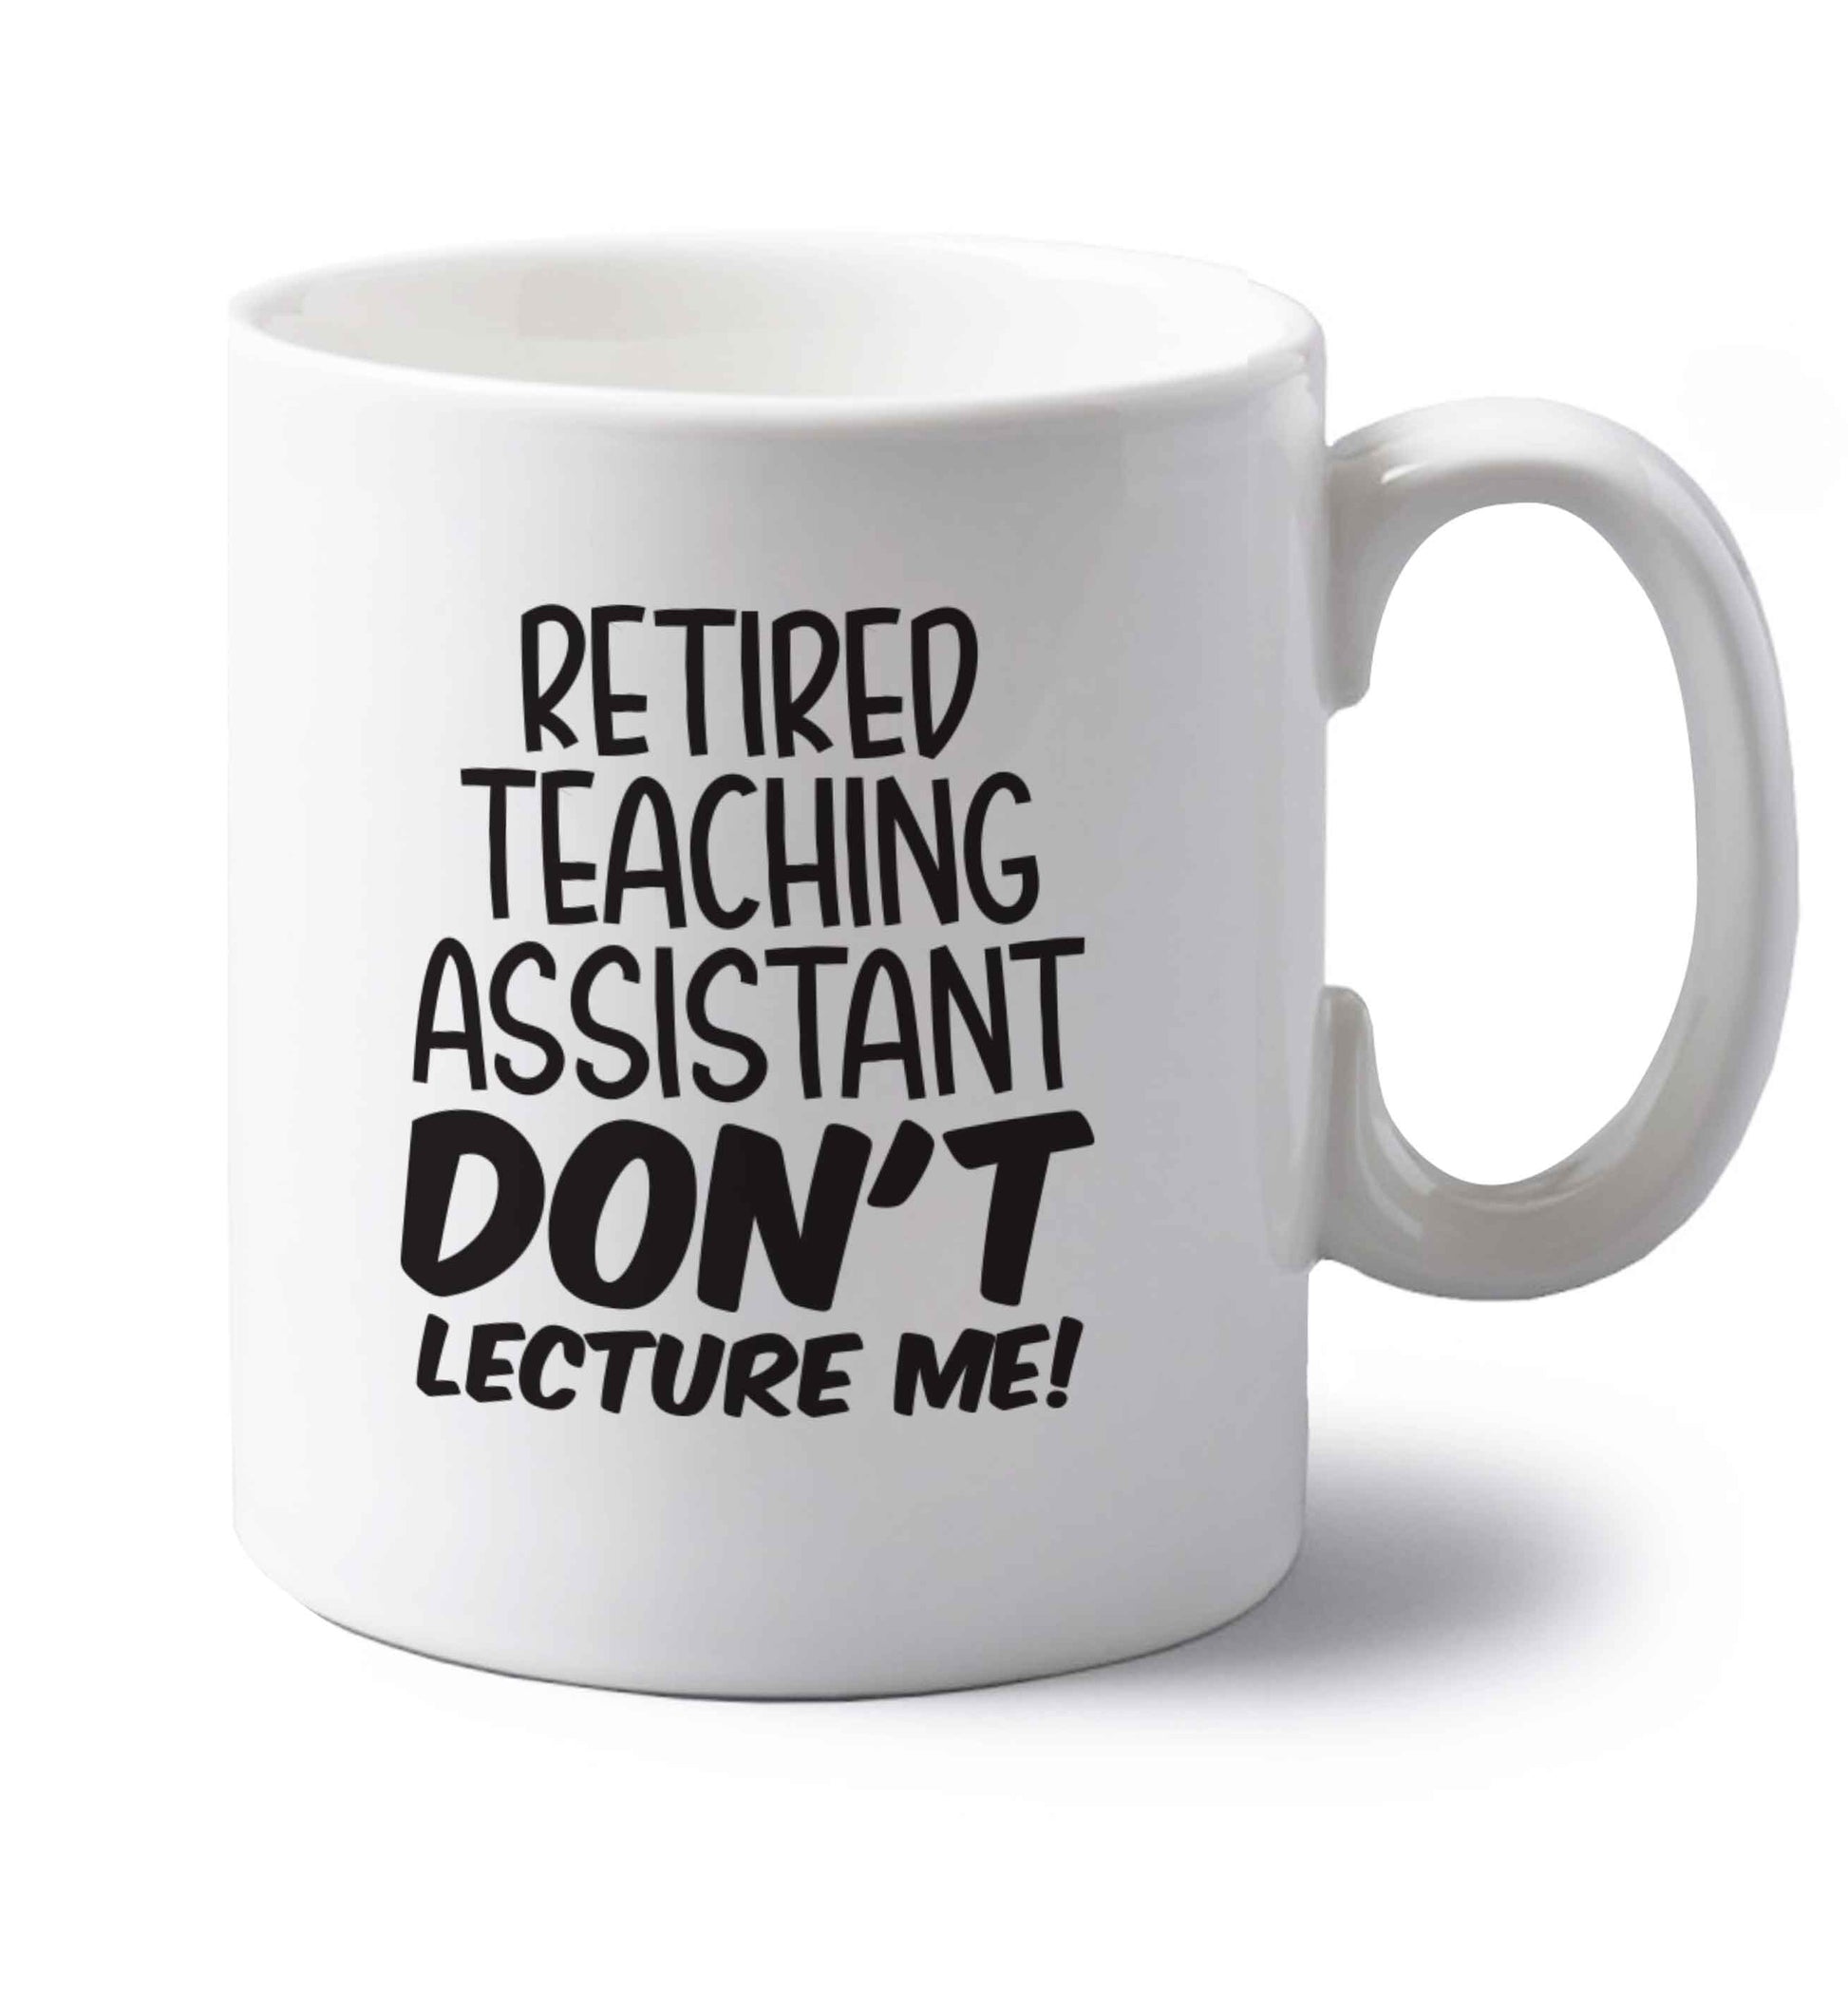 Retired teaching assistant don't lecture me left handed white ceramic mug 